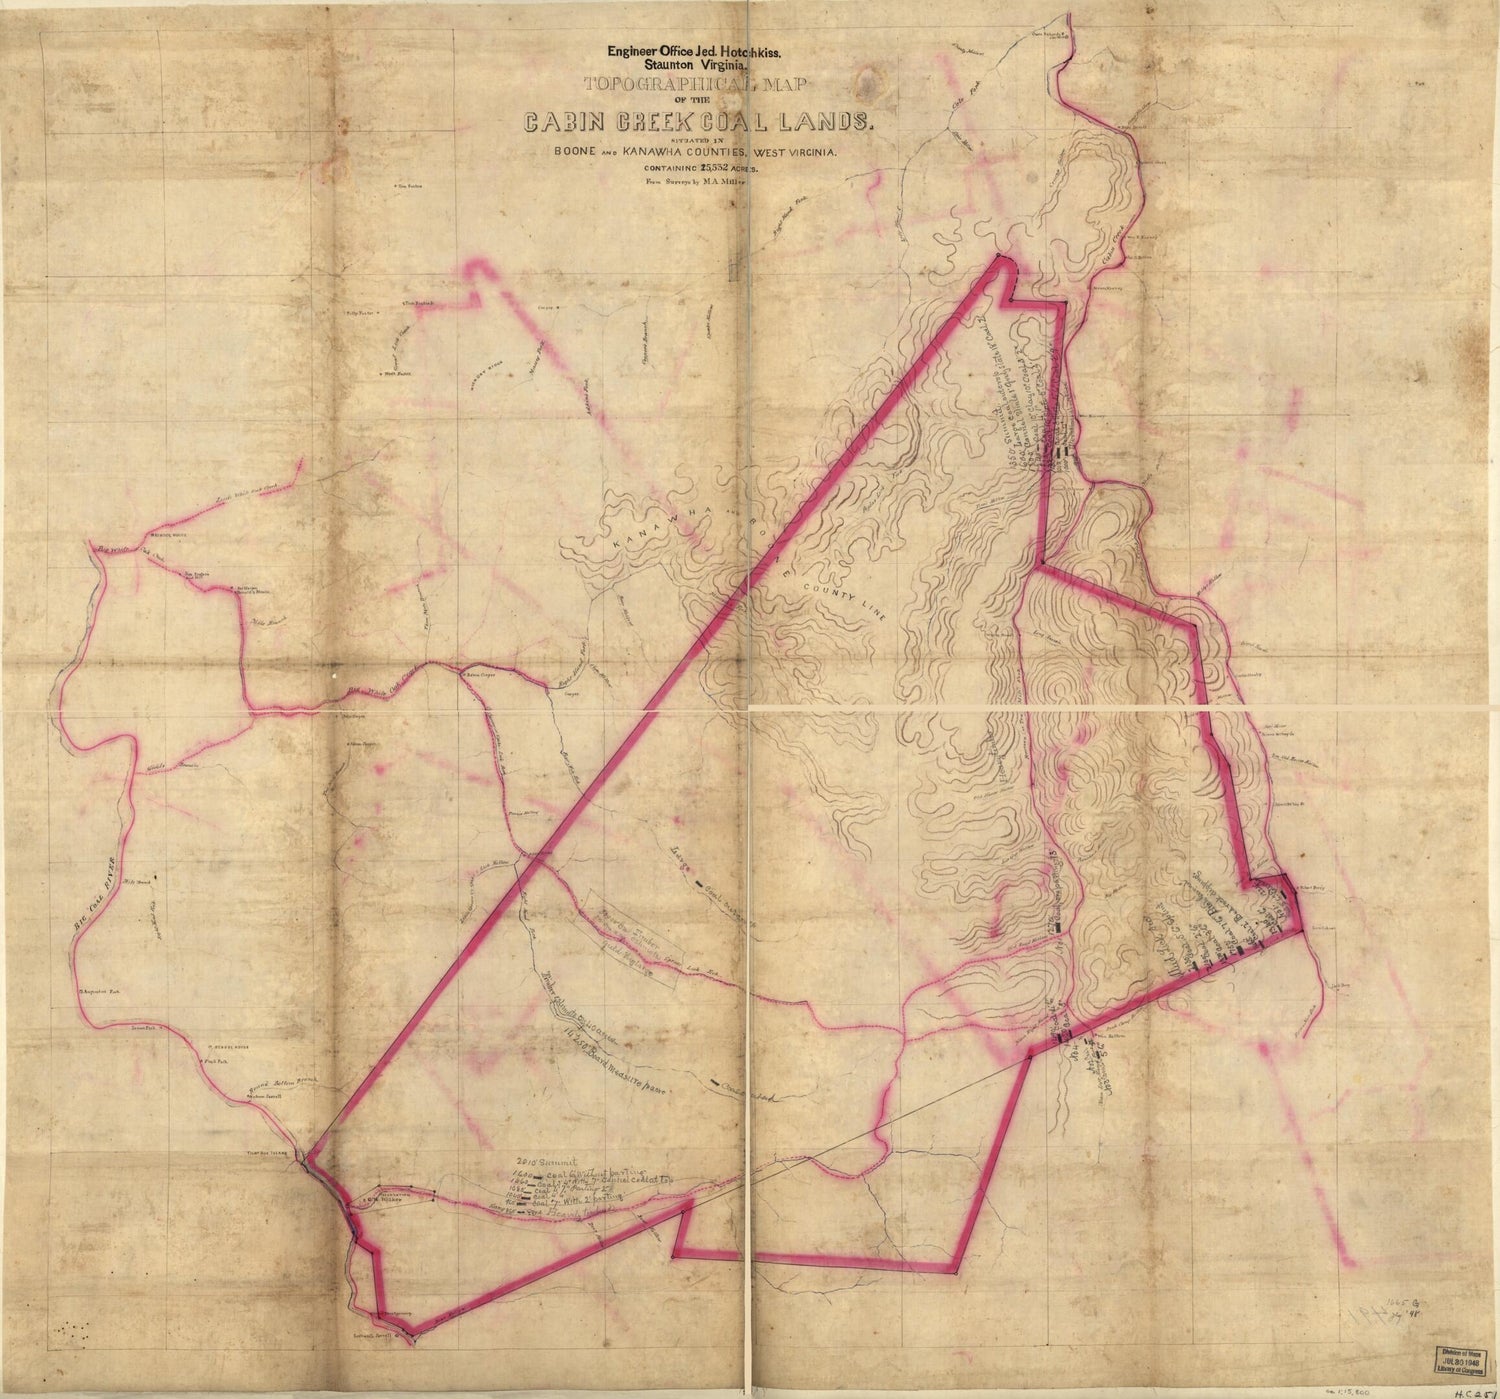 This old map of Topographical Map of the Cabin Creek Coal Lands, Situated In Boone and Kanawha Counties, West Virginia : Containing 15,532 Acres from 1880 was created by Jedediah Hotchkiss, M. A. Miller in 1880